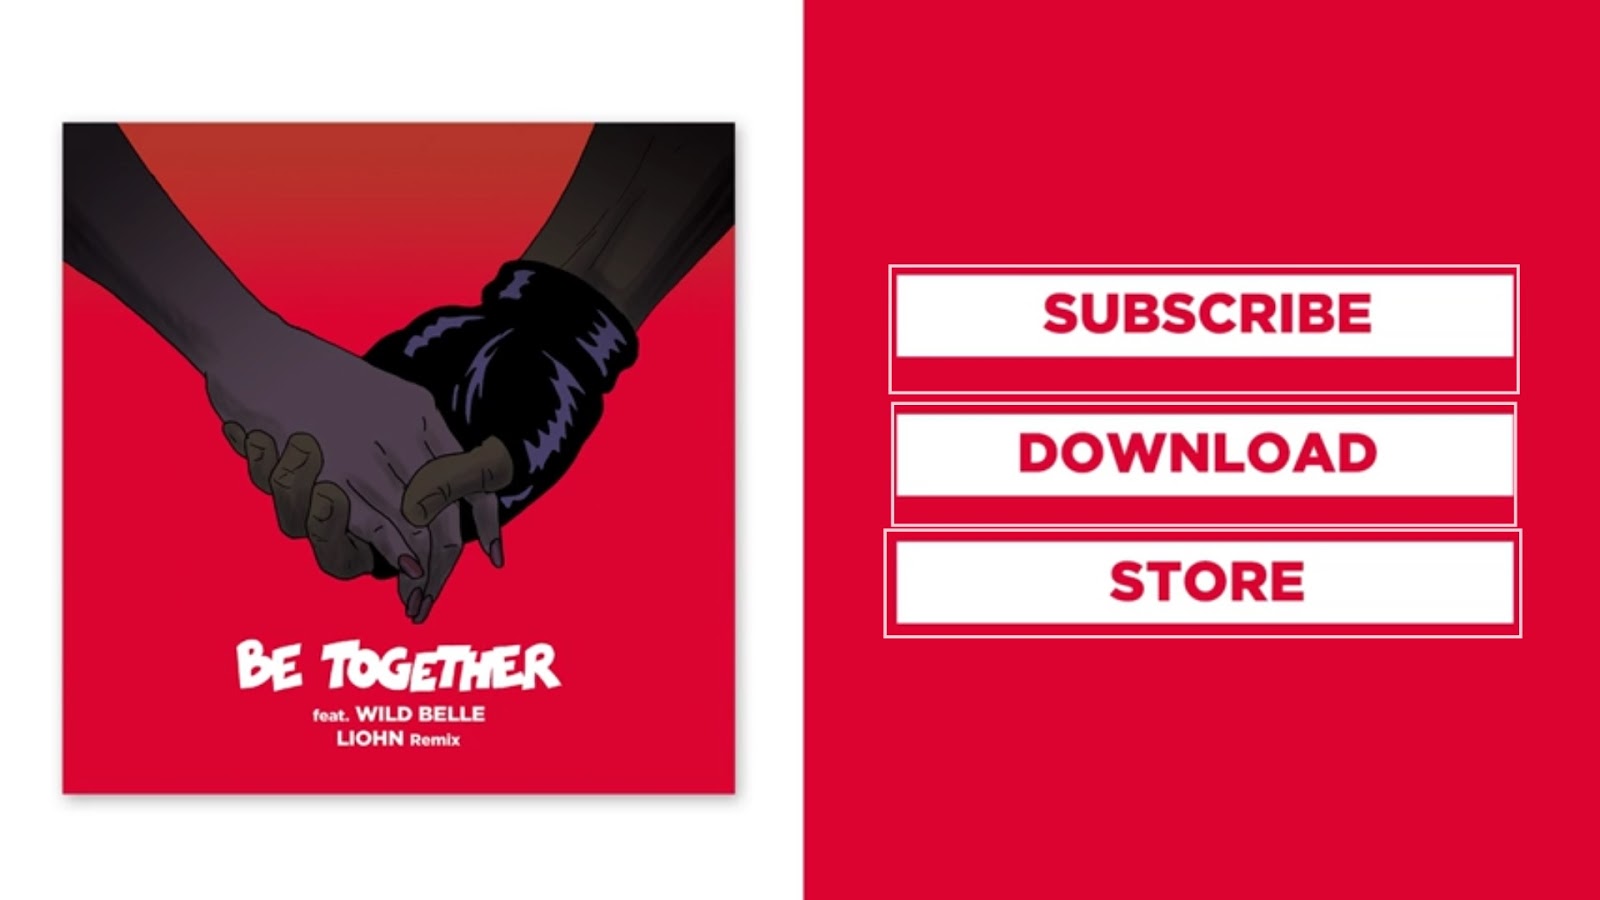 Be together Major Lazer. Be together (feat. Wild Belle) Major Lazer feat. Wild be. Been together. Be together текст. Песня be together